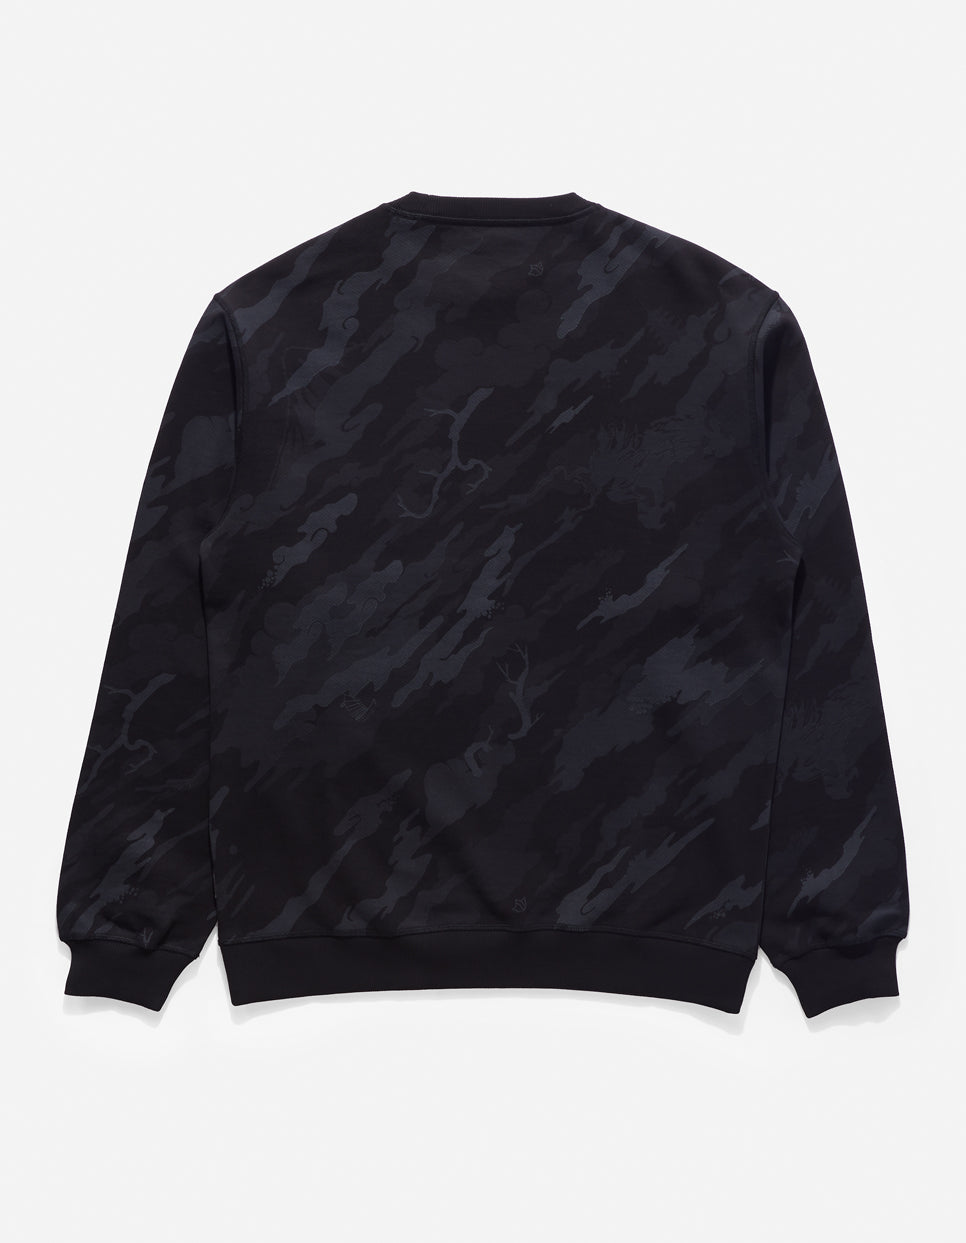 4598 DPM: Bonsai Forest MILTYPE Embroidered Crew Sweat Subdued Night